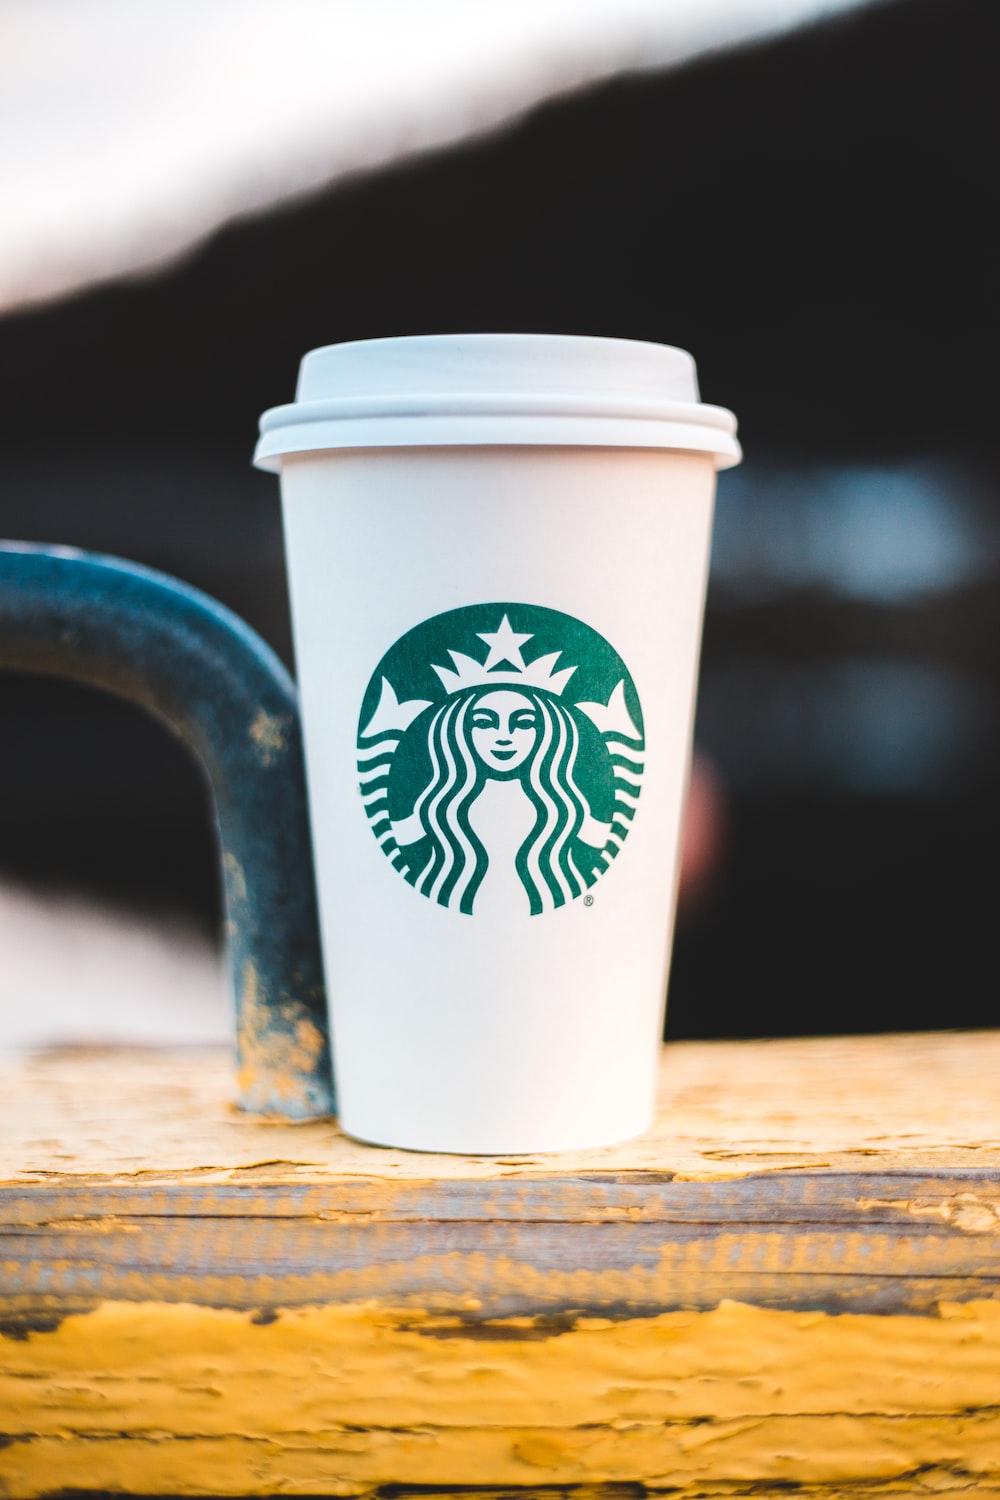 Starbucks' ambitious plan to redesign Iconic Cup: Will it gain